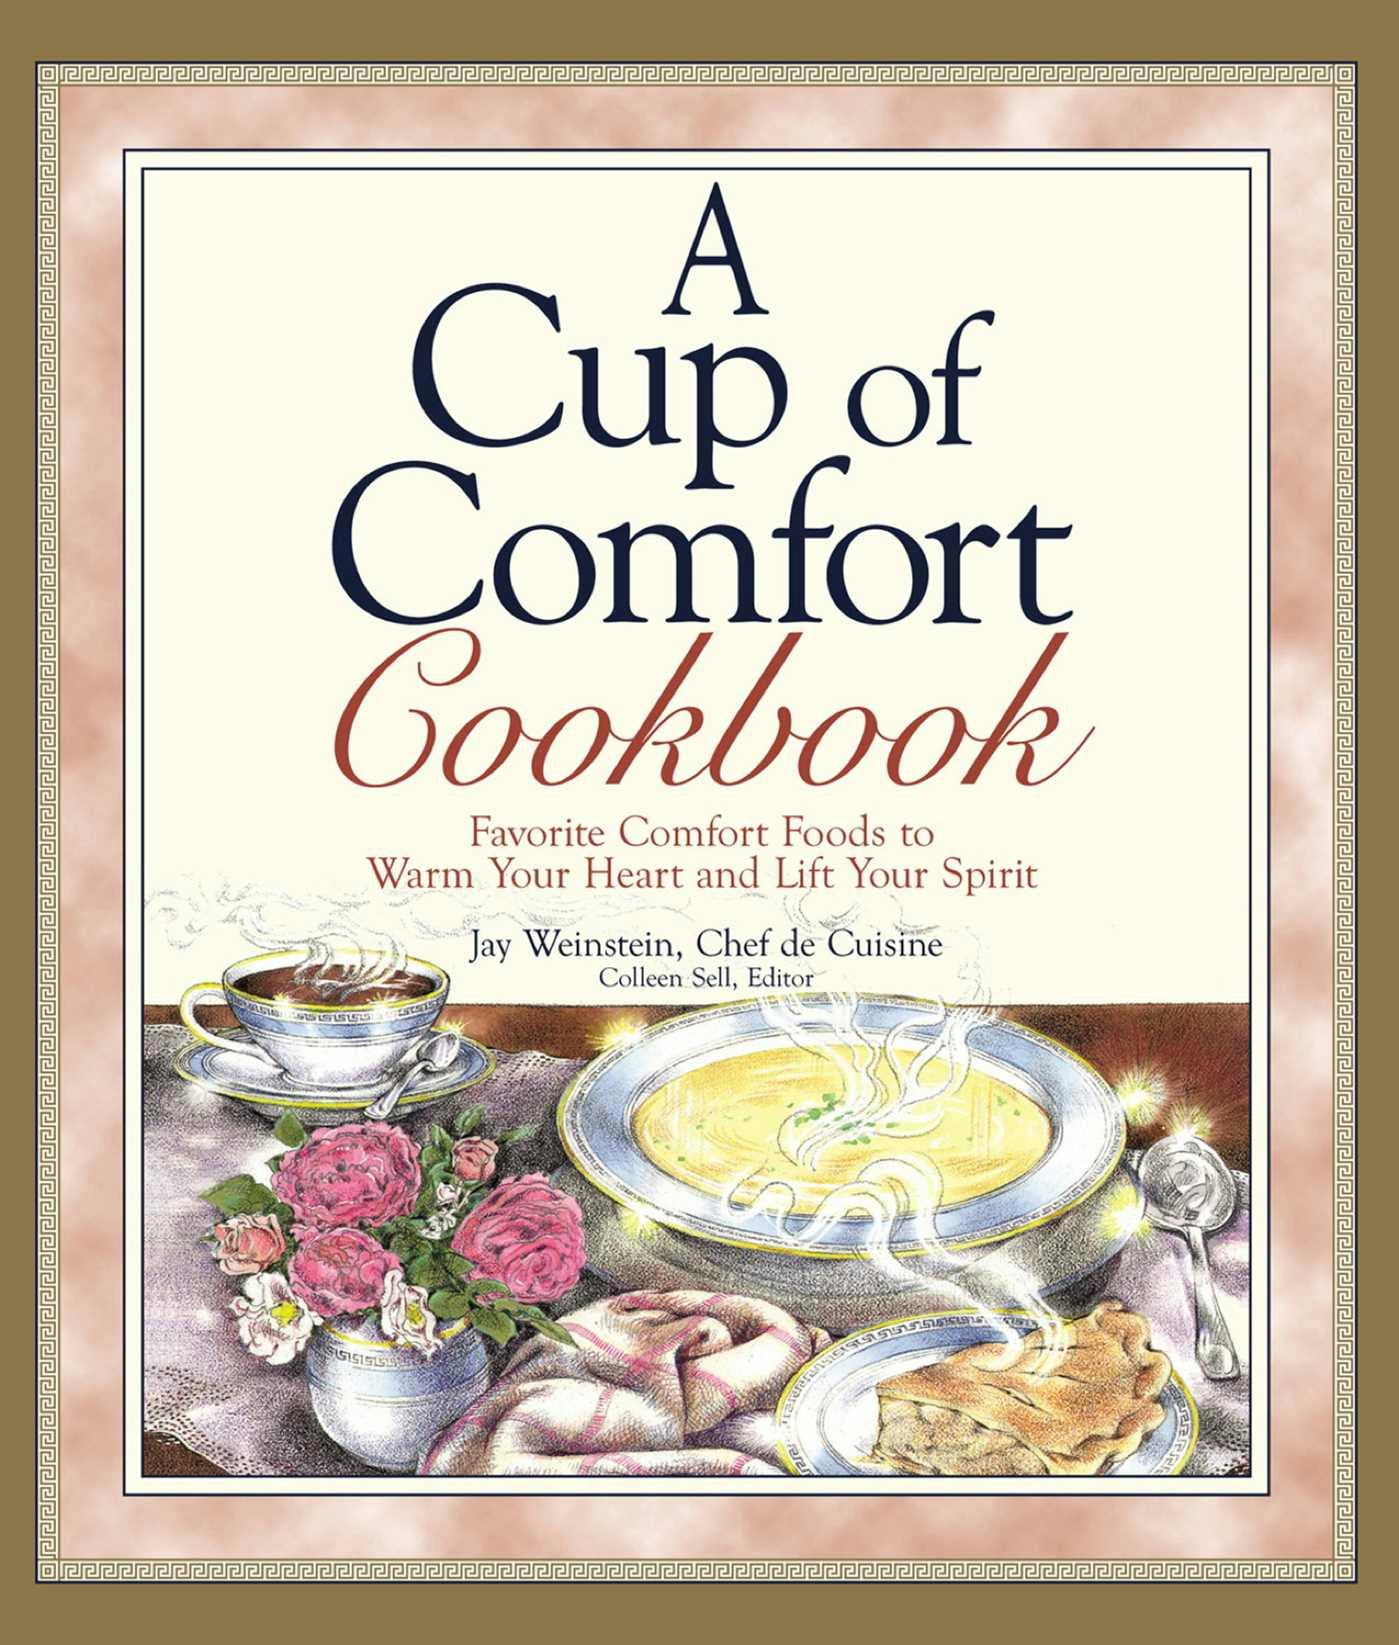 A Cup of Comfort Cookbook: Favorite Comfort Foods to Warm Your Heart and Lift Your Spirit - Jay Weinstein